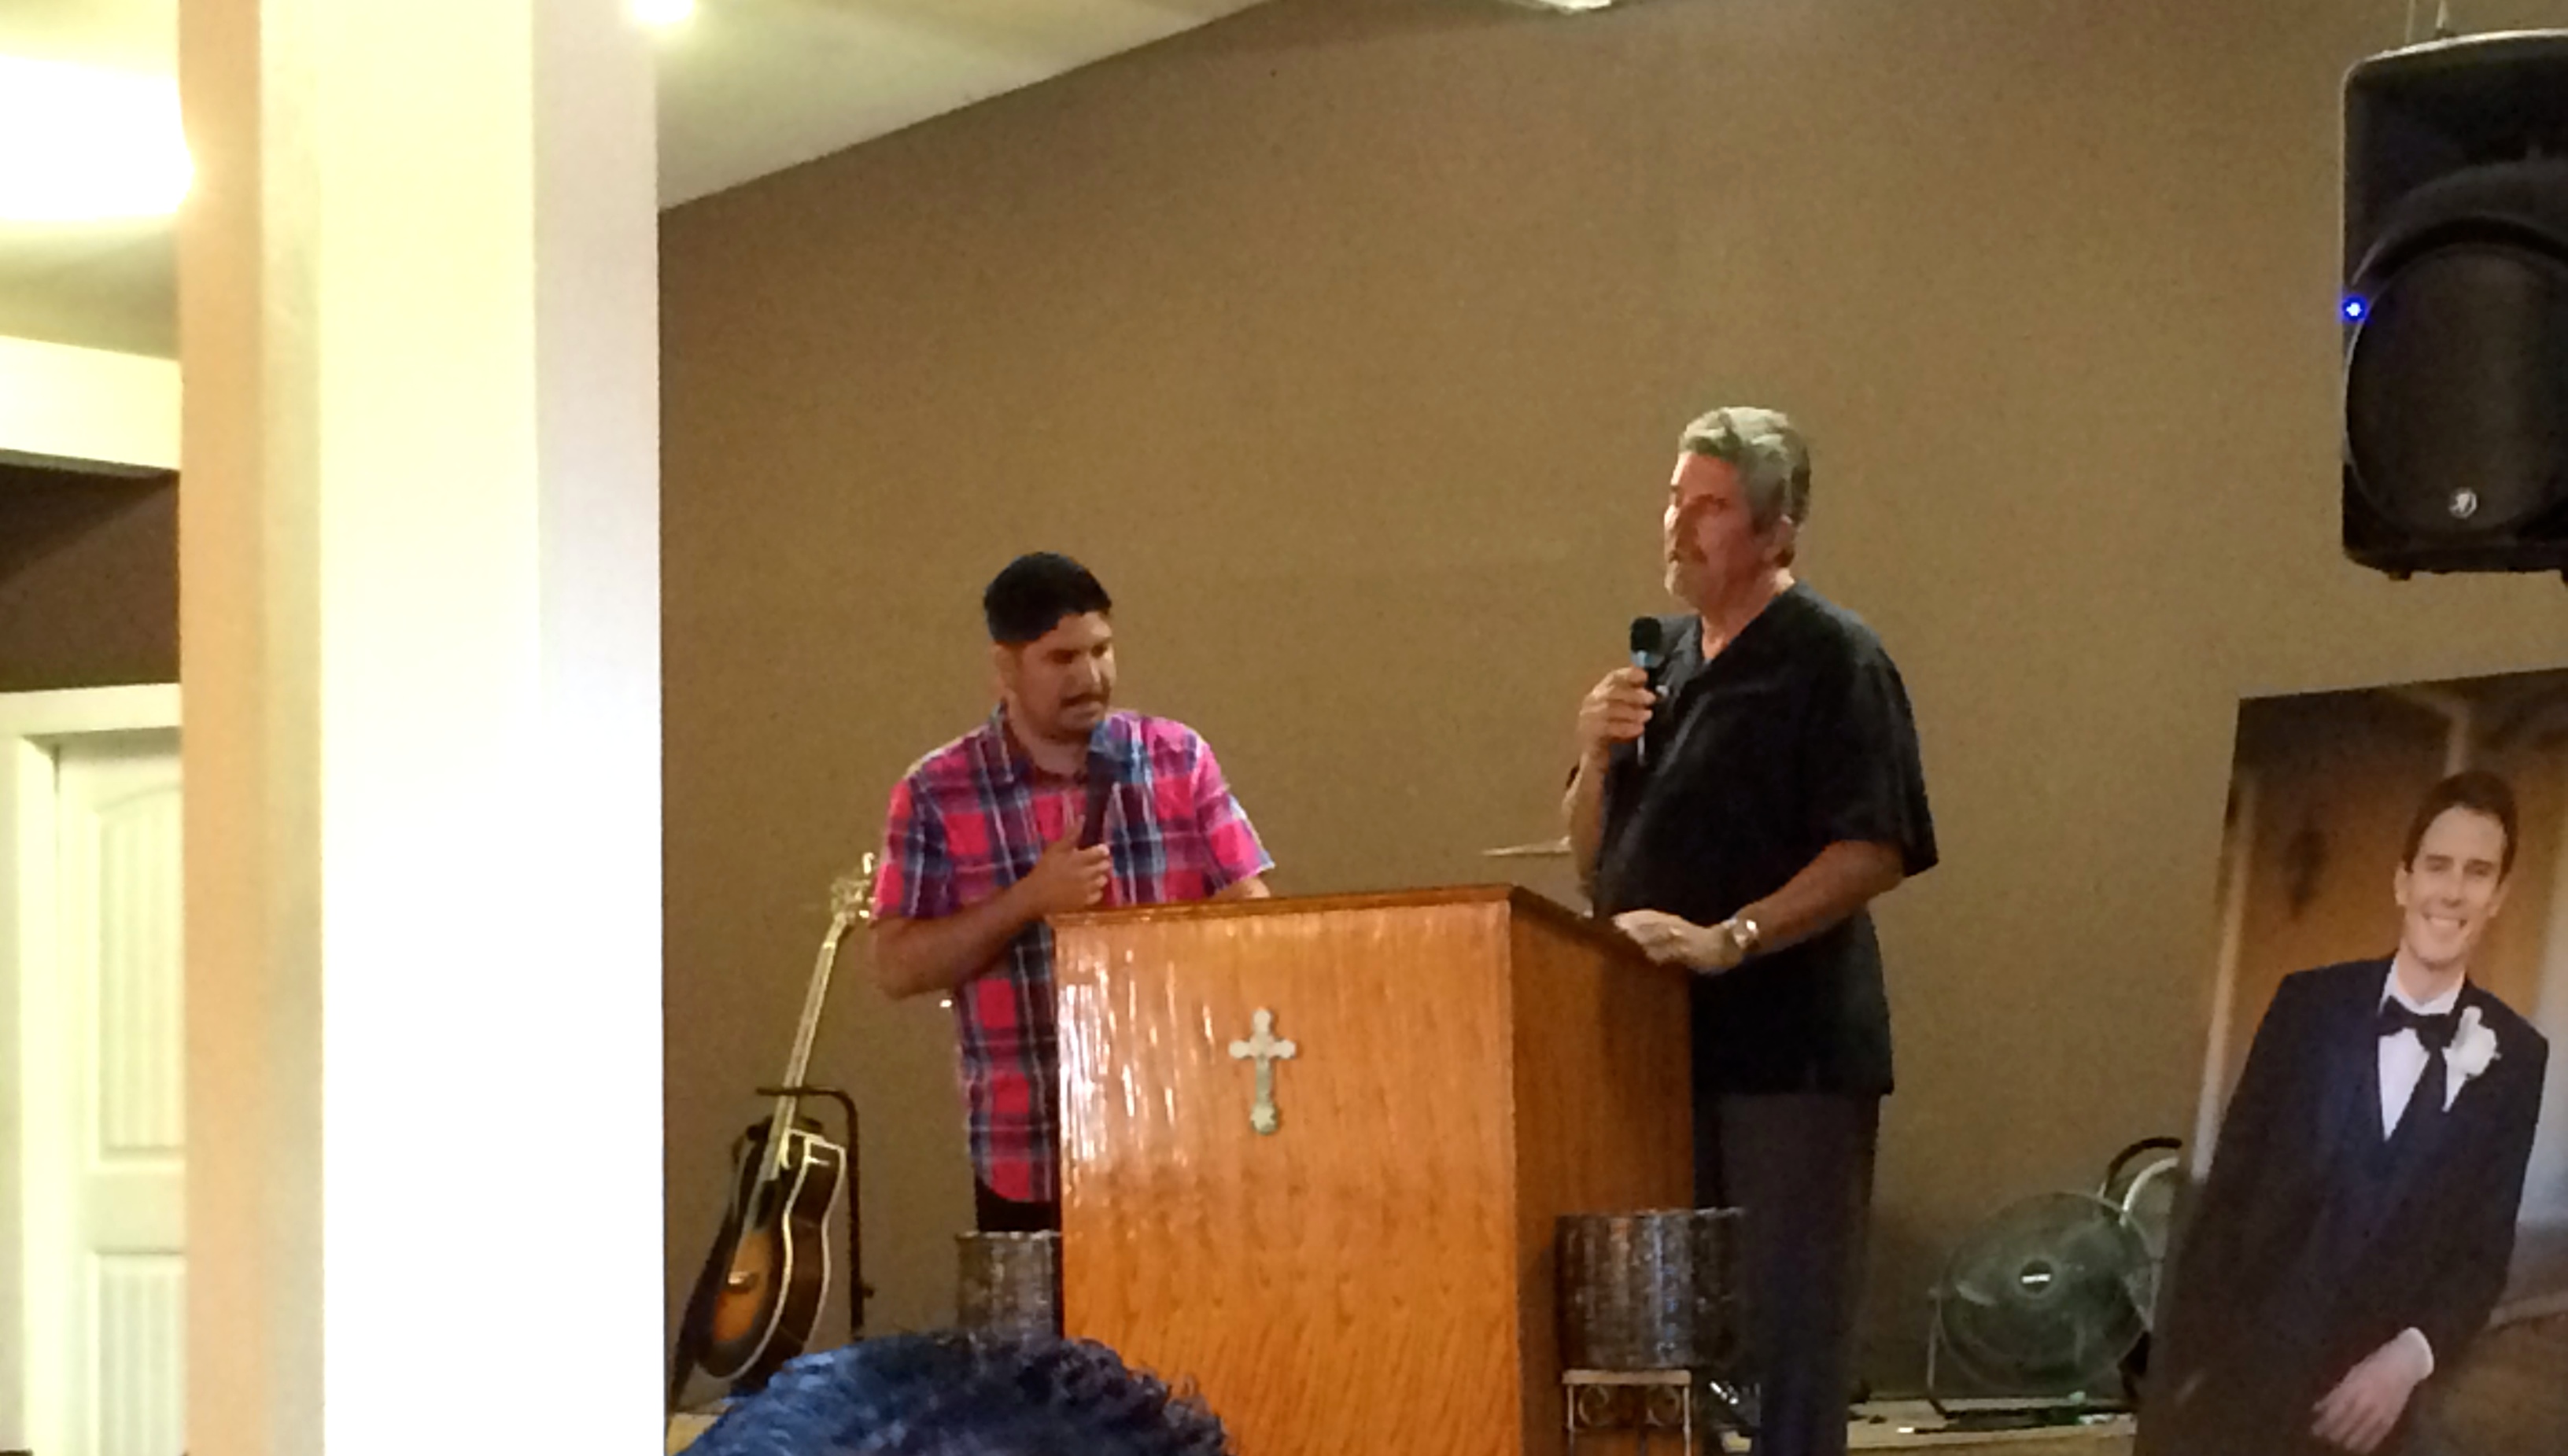 Scott Griffiths sharing at the memorial service for his son, Jacob. Turi Nuñez translated for Scott